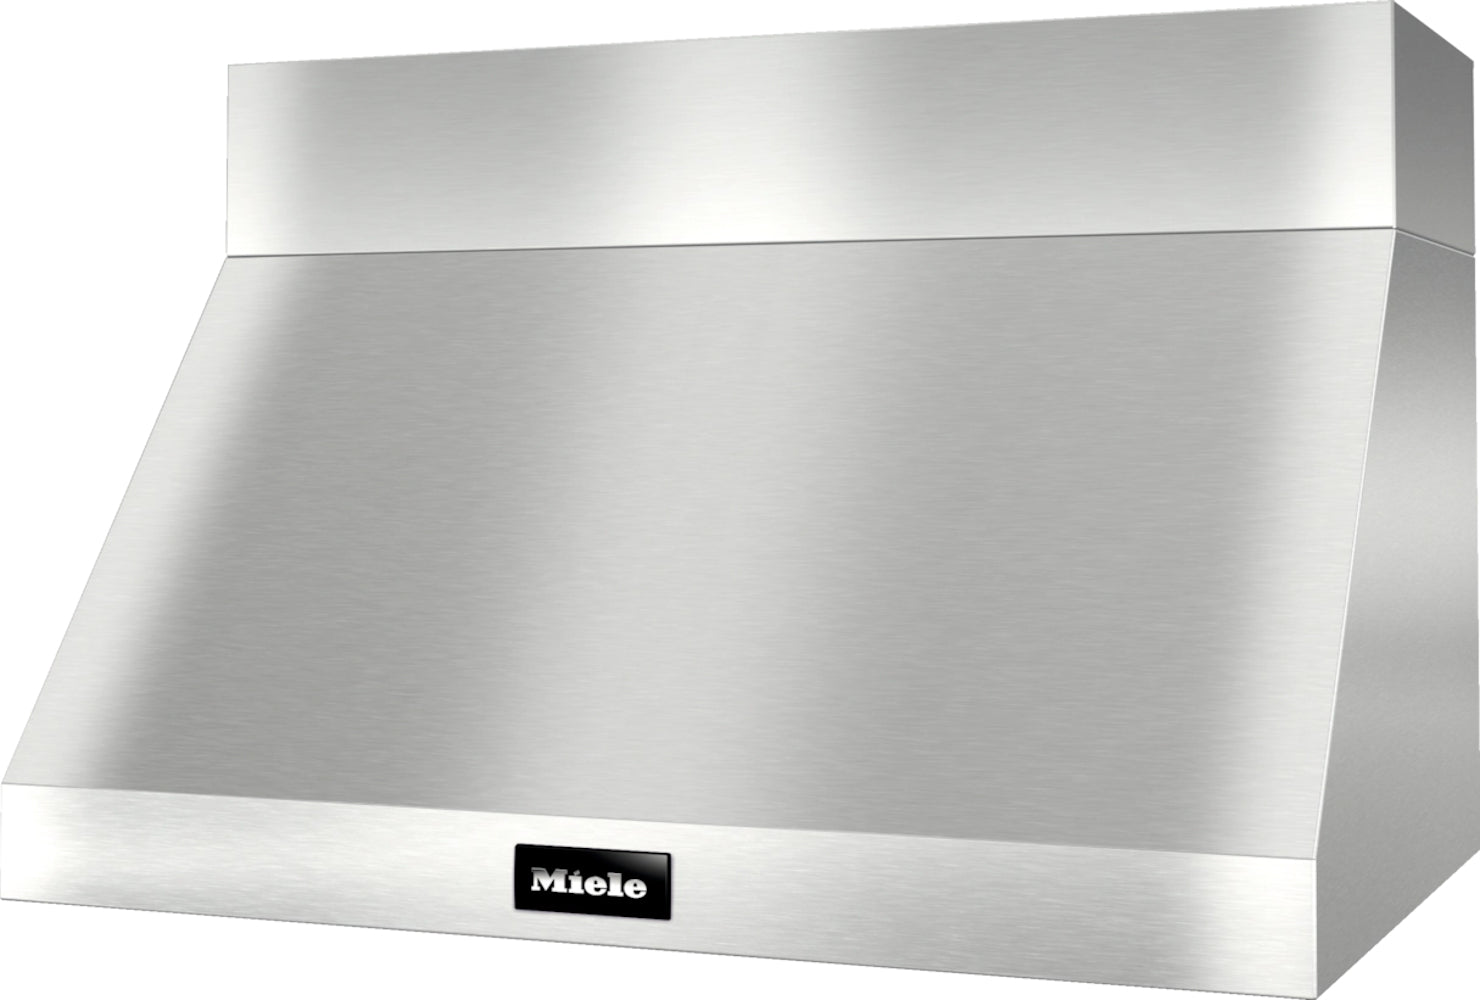 Miele - 36 Inch  CFM Wall Mount and Chimney Range Vent in Stainless - DAR 1230-3